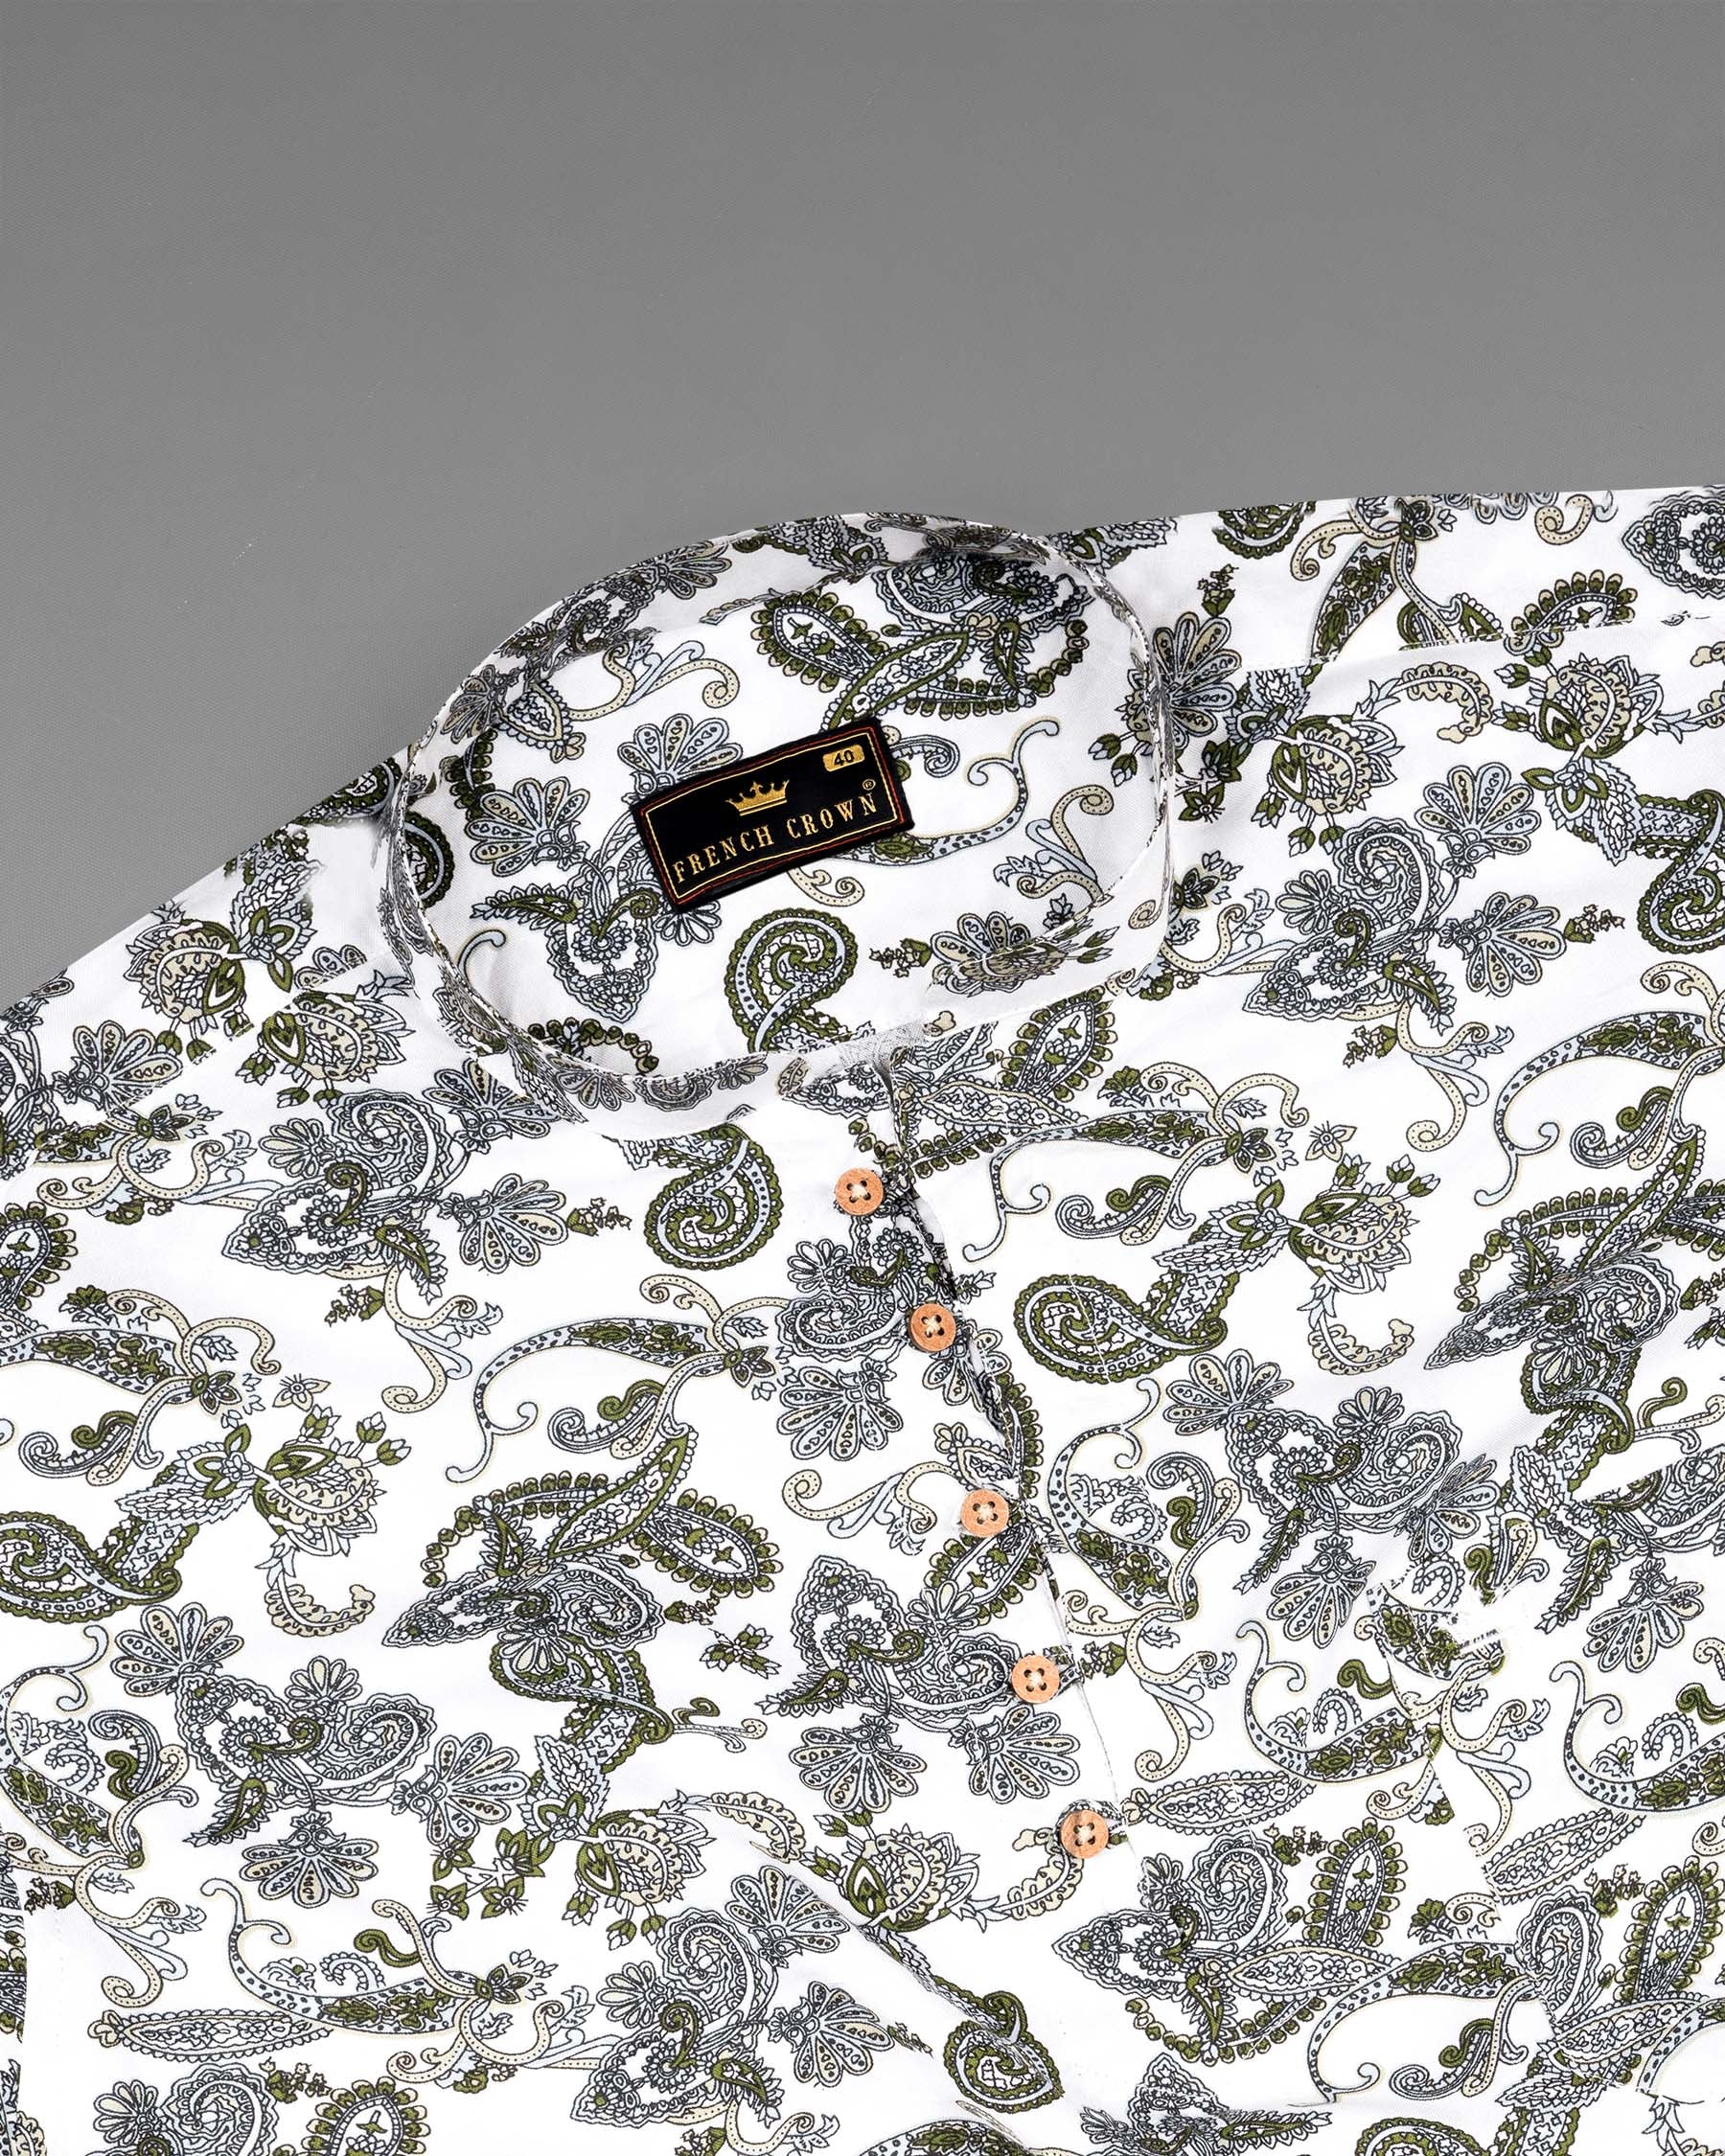 White Lilac and Rifle Green Paisley Printed Tencel Kurta Shirt 6847-KS-38,6847-KS-38,6847-KS-39,6847-KS-39,6847-KS-40,6847-KS-40,6847-KS-42,6847-KS-42,6847-KS-44,6847-KS-44,6847-KS-46,6847-KS-46,6847-KS-48,6847-KS-48,6847-KS-50,6847-KS-50,6847-KS-52,6847-KS-52